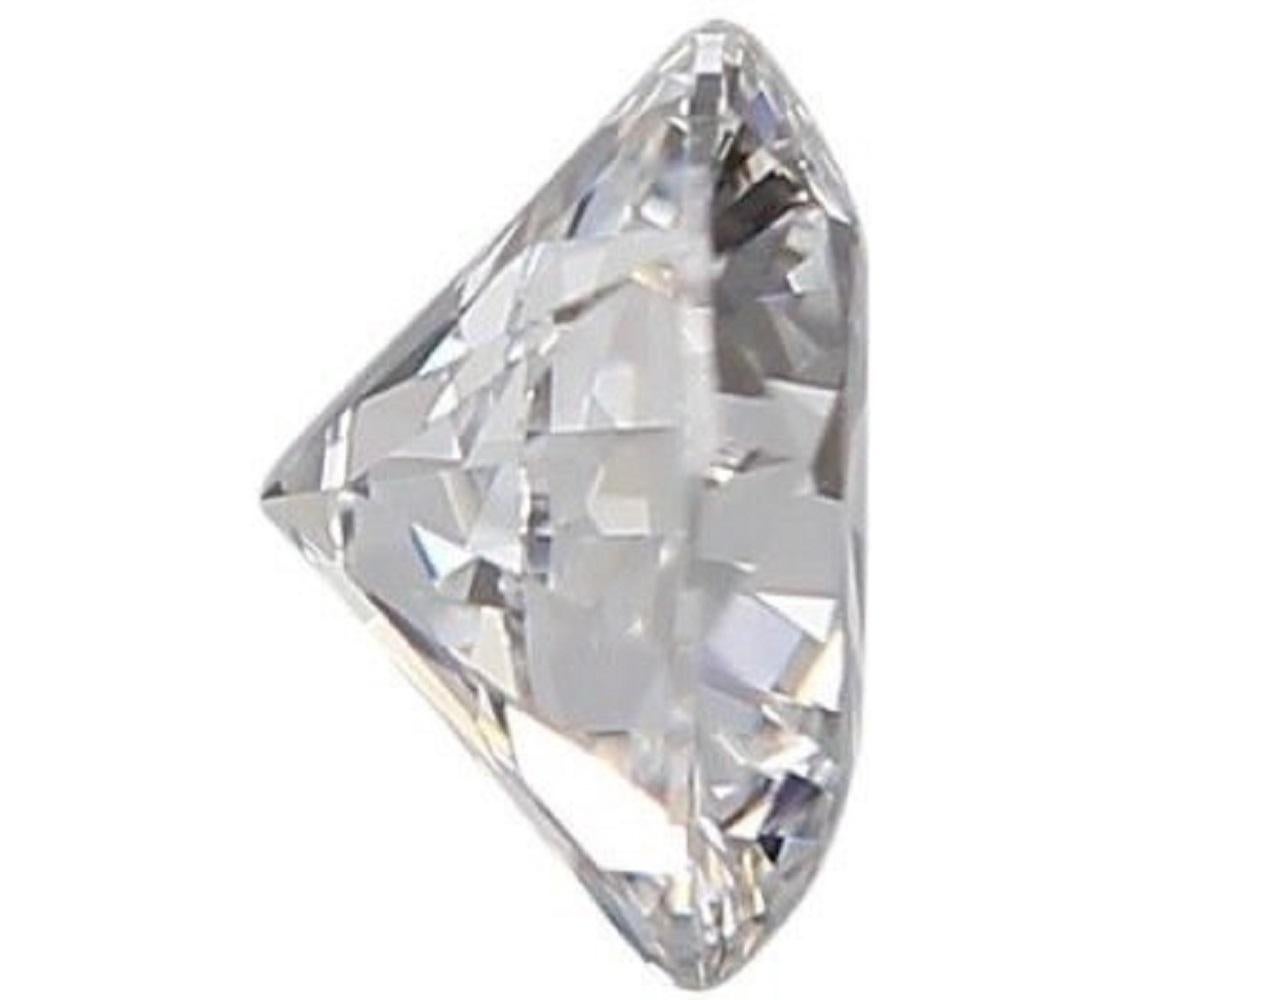 1 Sparkling natural round brilliant cut diamond in a 0.9 carat I VVS1 with very good cut. This diamond comes with GIA Certificate and laser inscription number.

SKU: C-DSPV-167351-3
GIA 6451226991